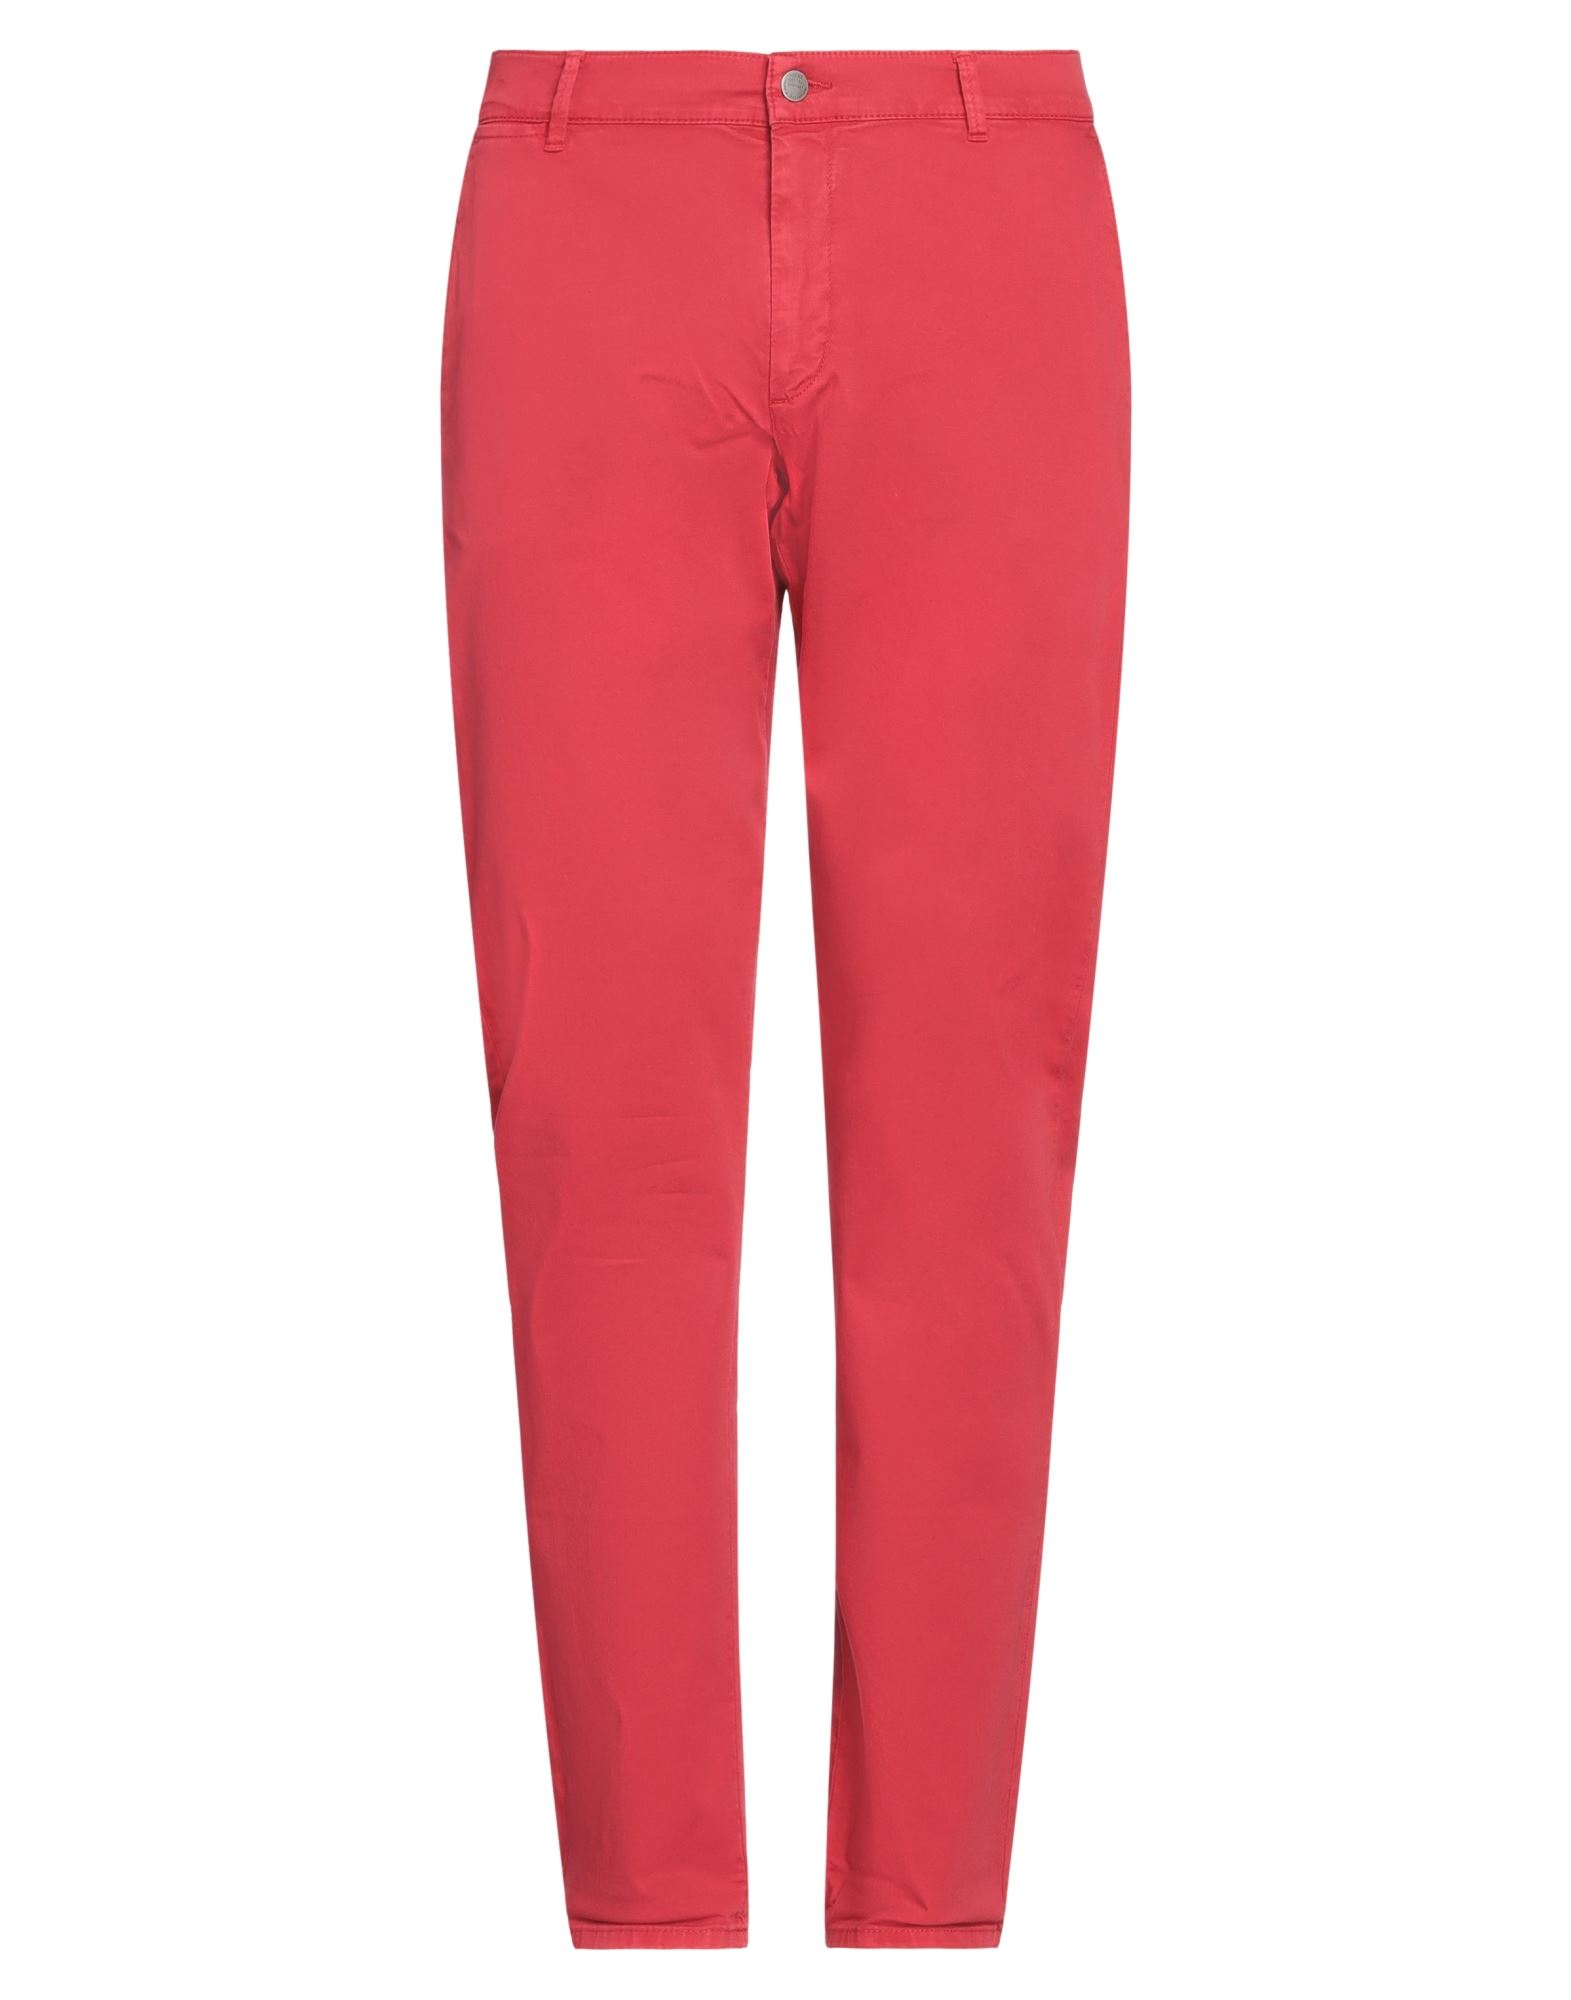 Daniele Alessandrini Homme Pants In Red